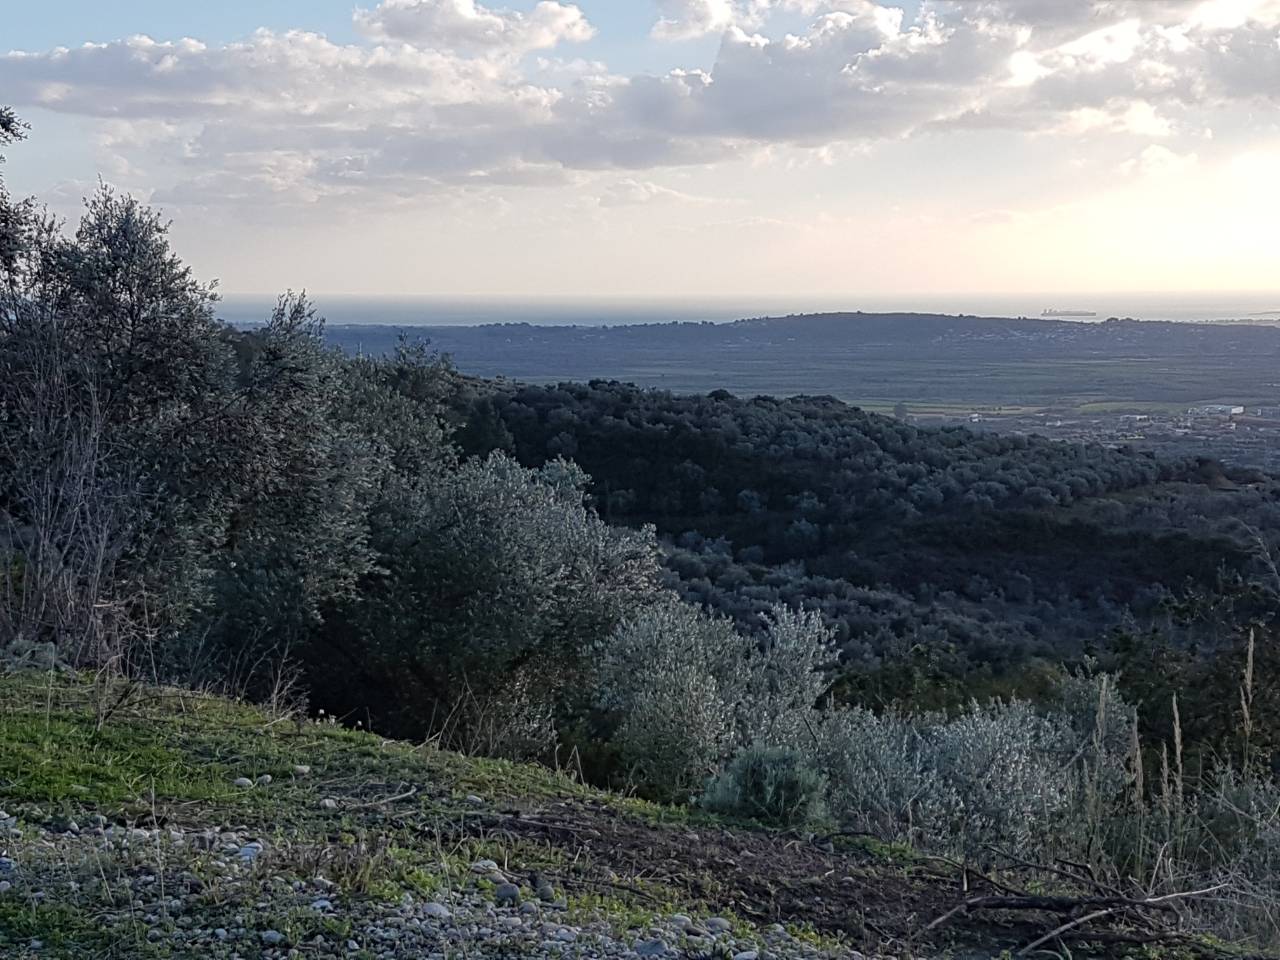 January: The Mediterranean Olive Tree Throughout the Year